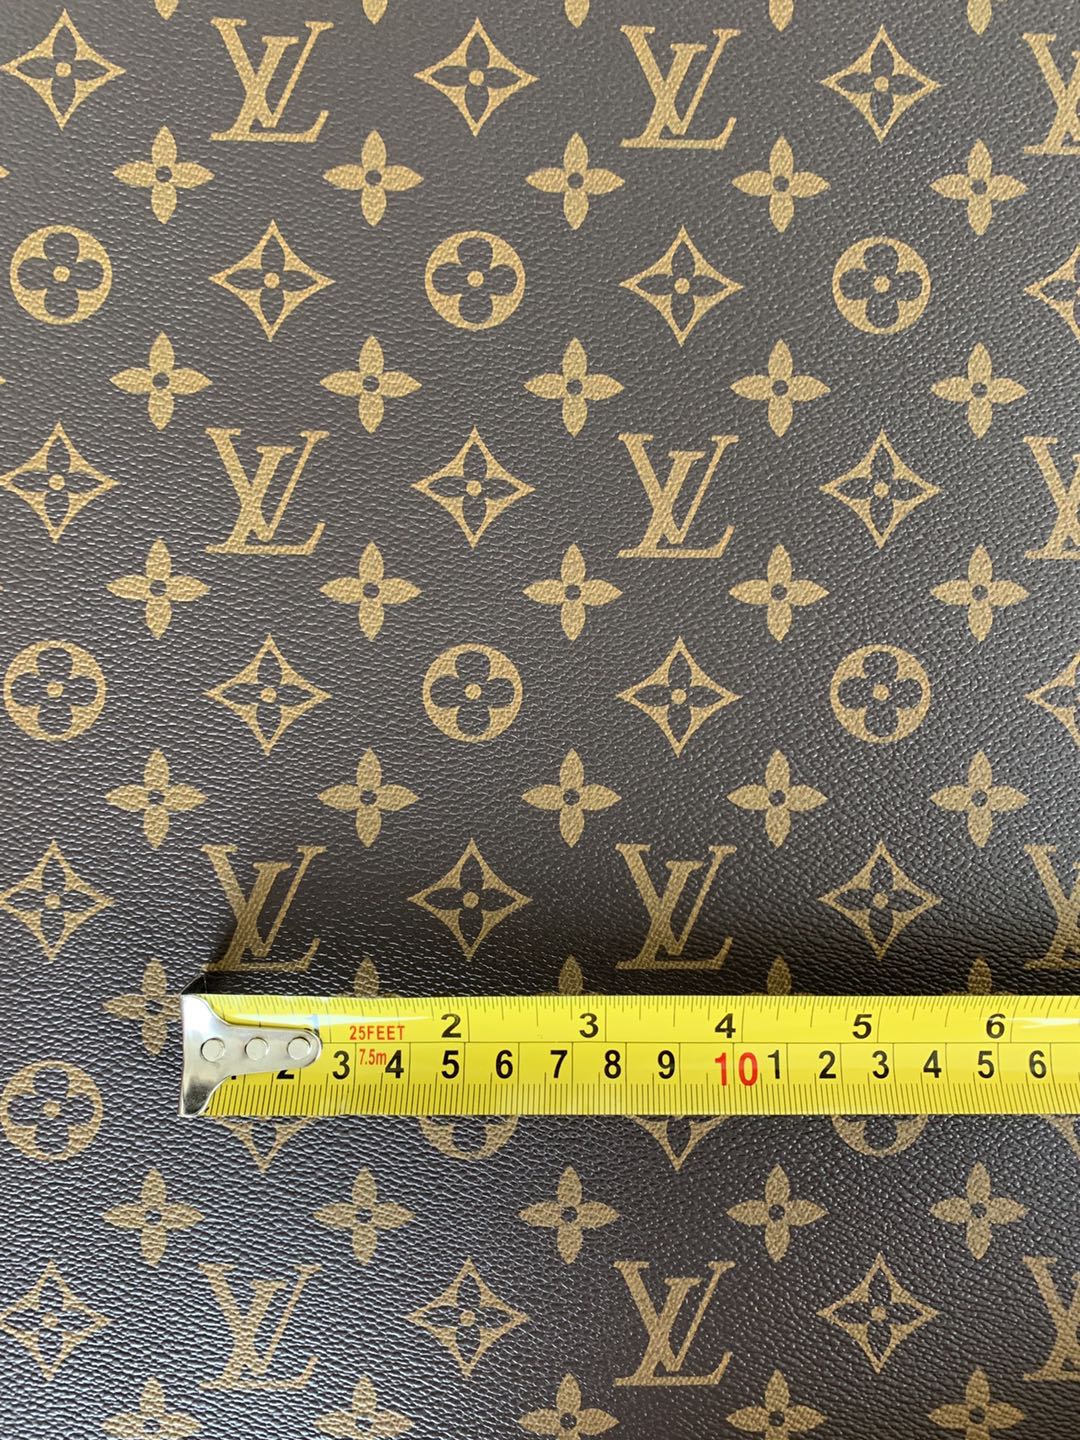 Faux Louis Vuitton Fabric By The Yard